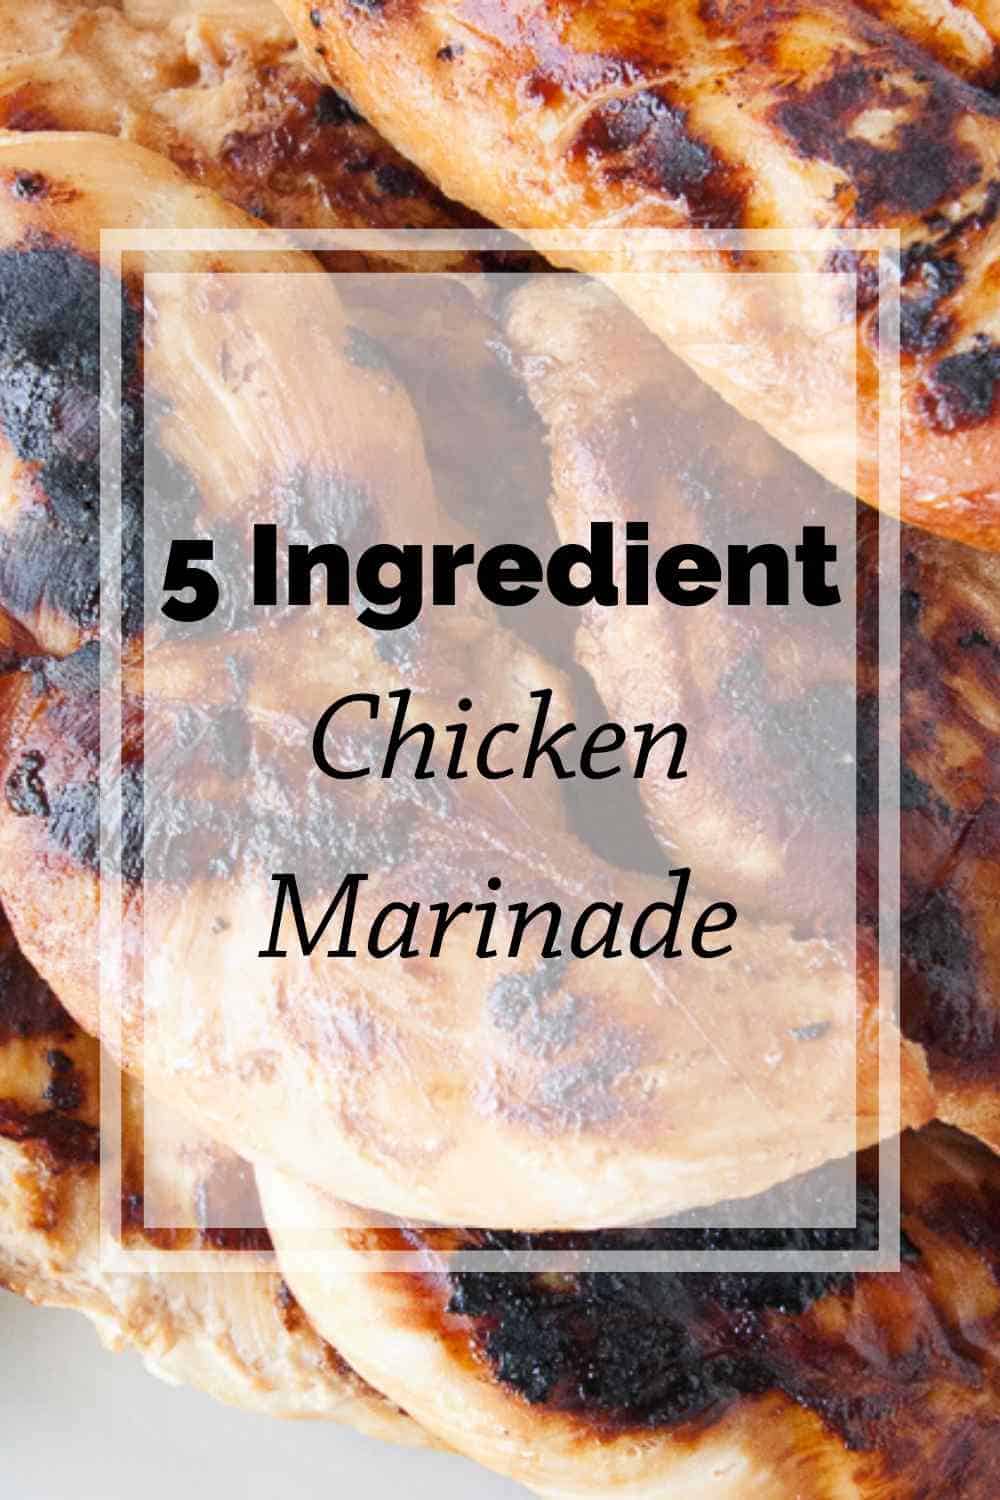 5 Ingredient Chicken Marinade - Mindee's Cooking Obsession